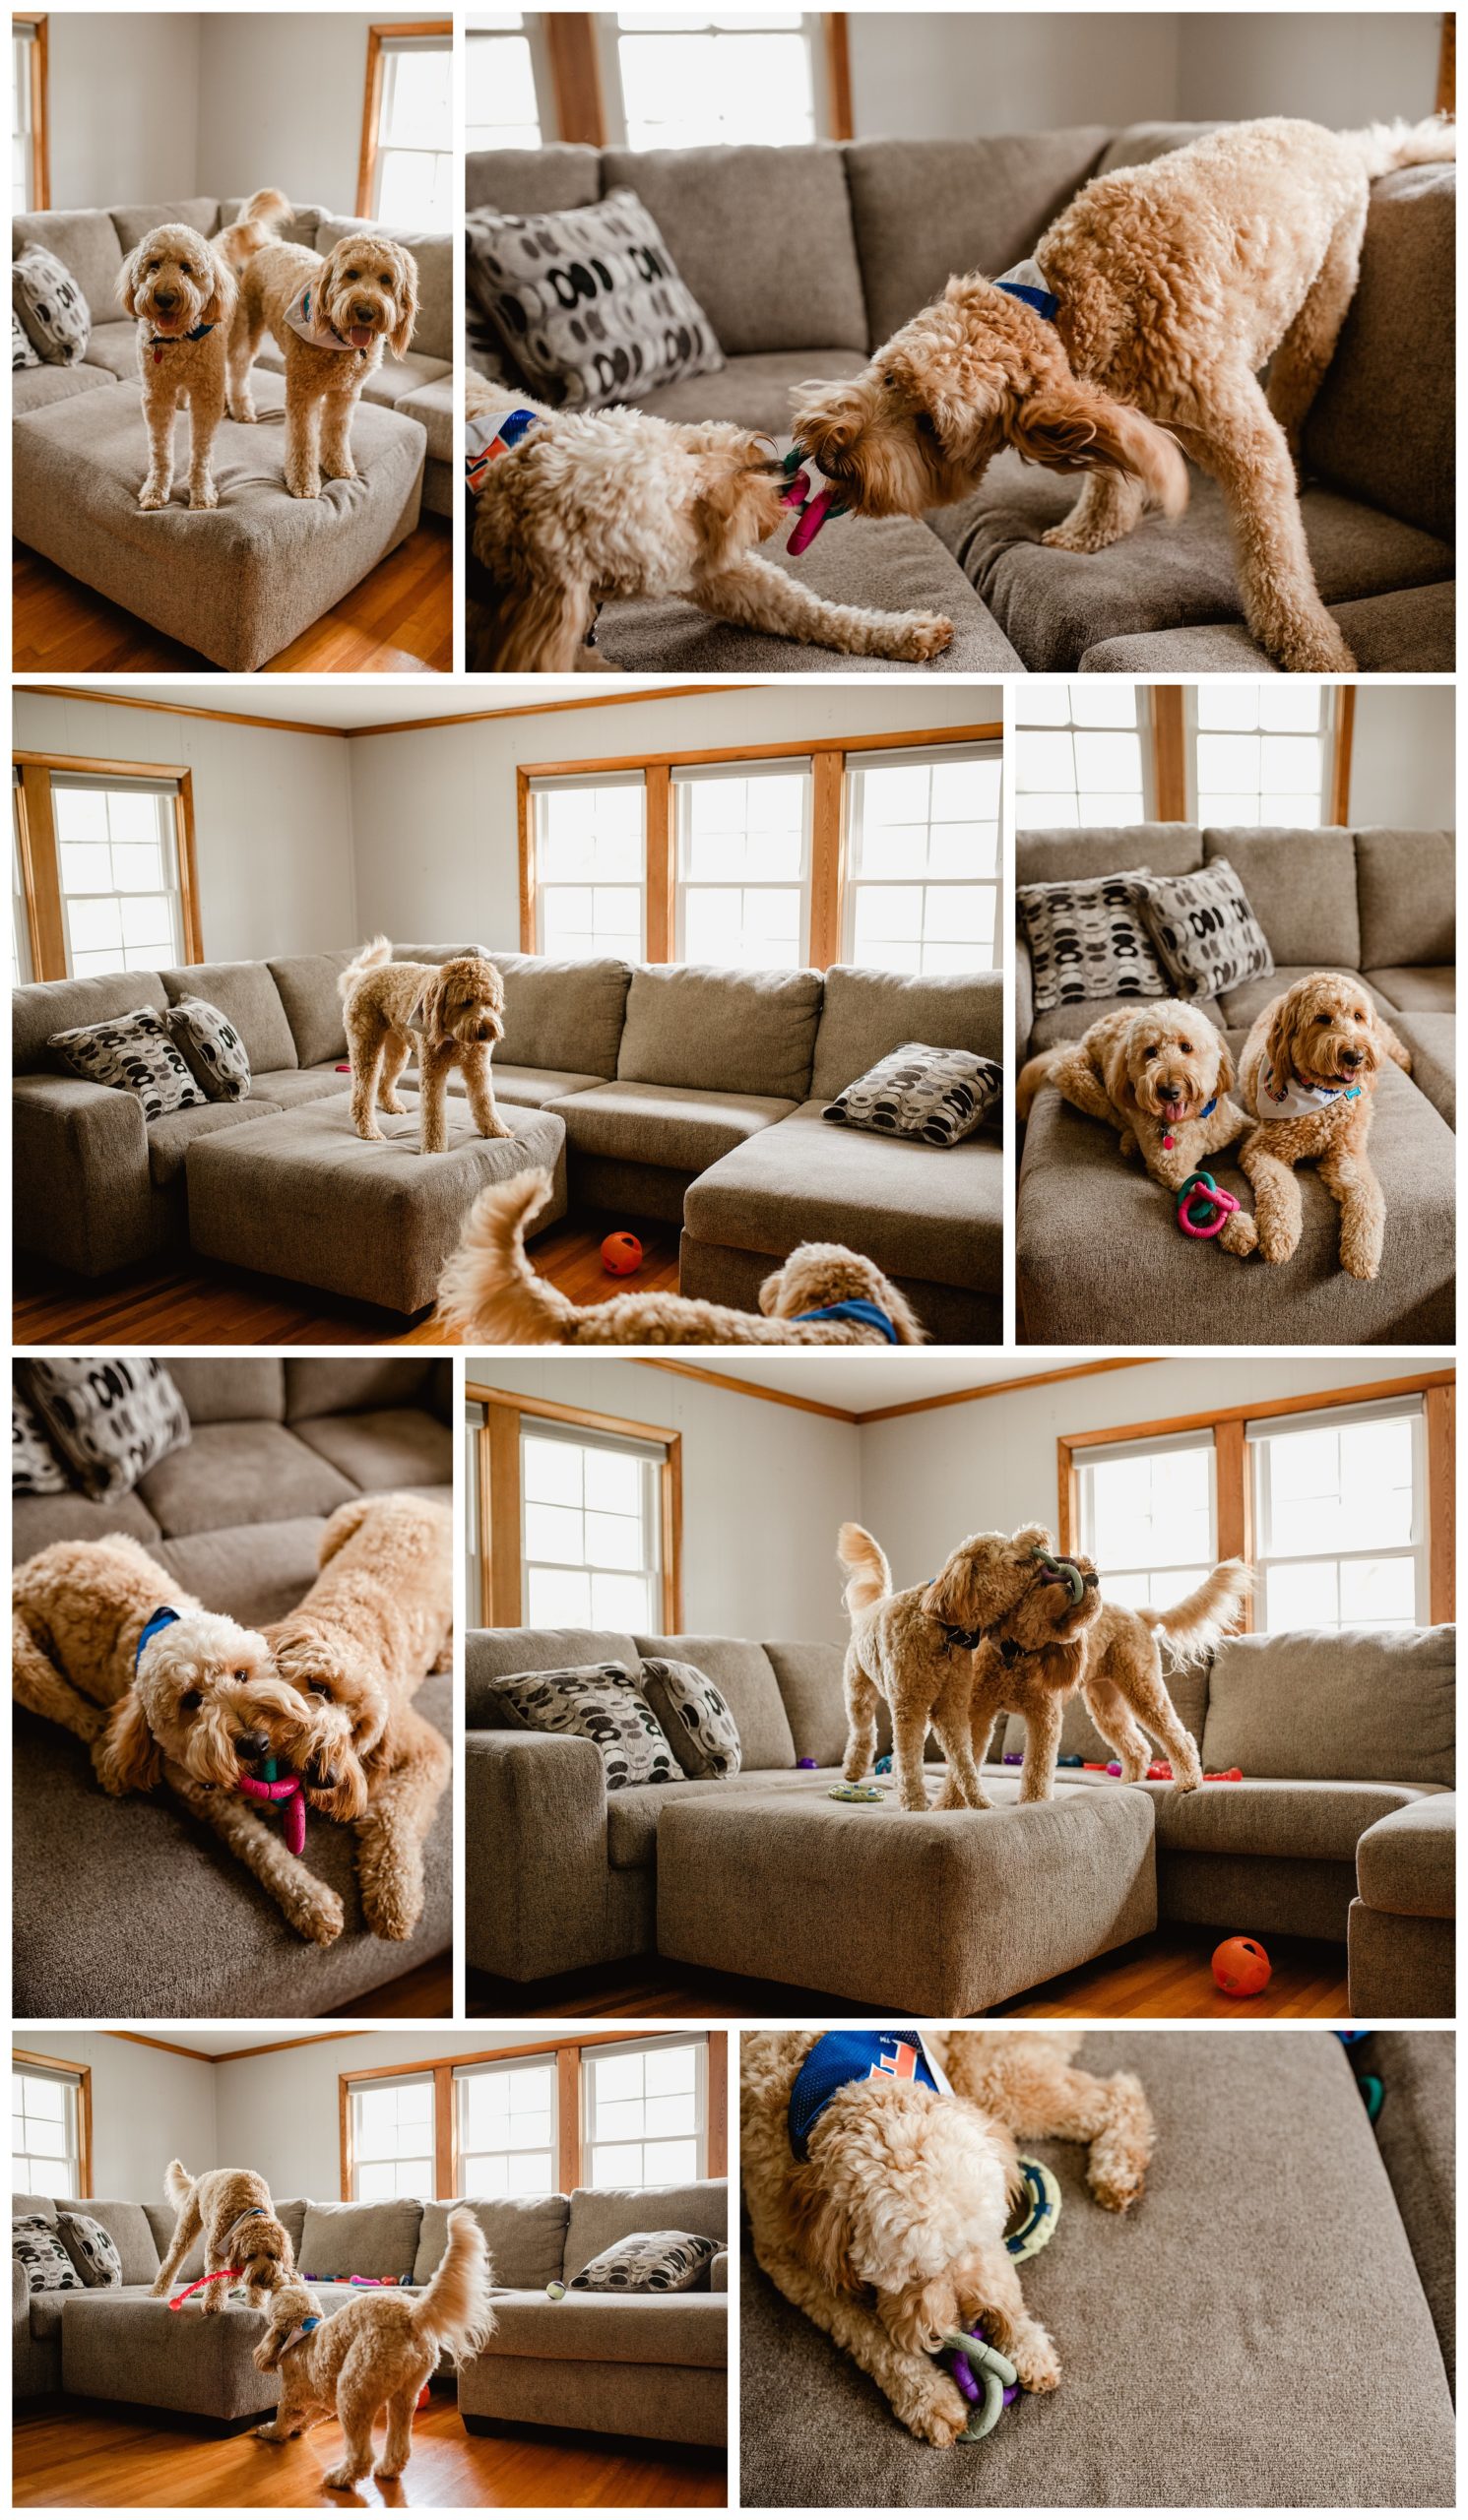 What it's really like to own dogs, a saga from a lifestyle pet photographer.